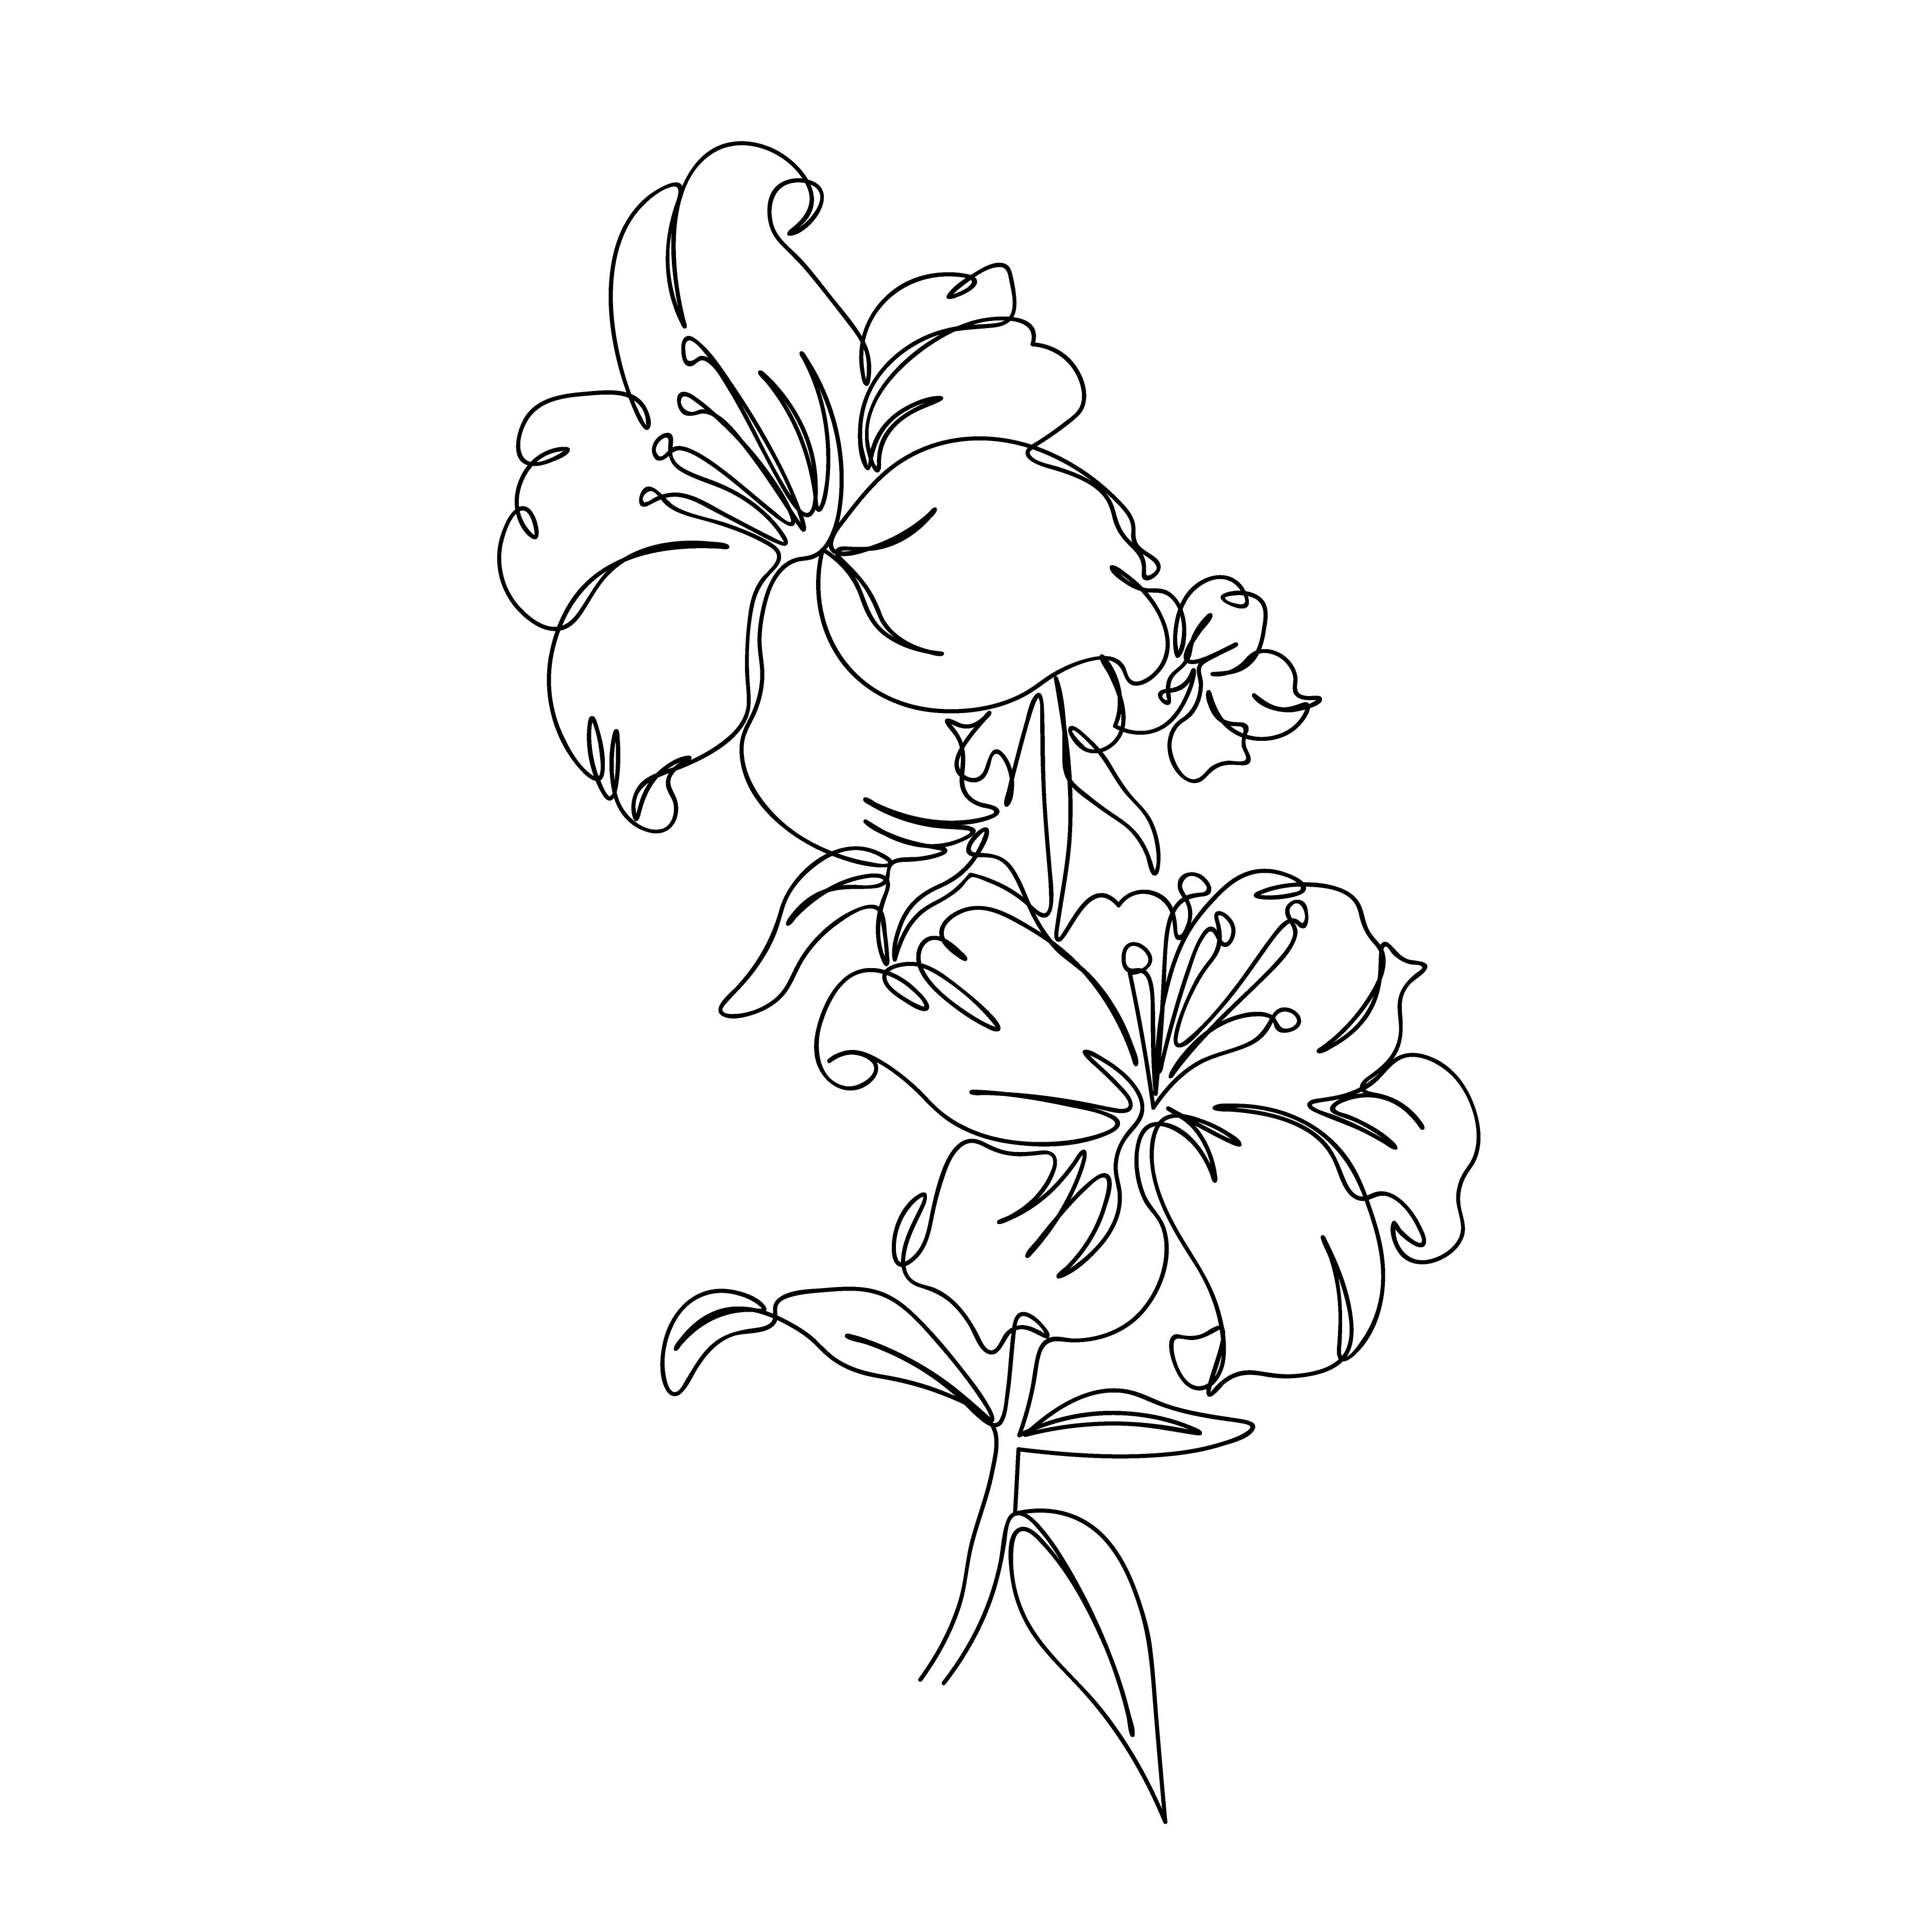 Hibiscus flower drawing easy 🌺 - YouTube